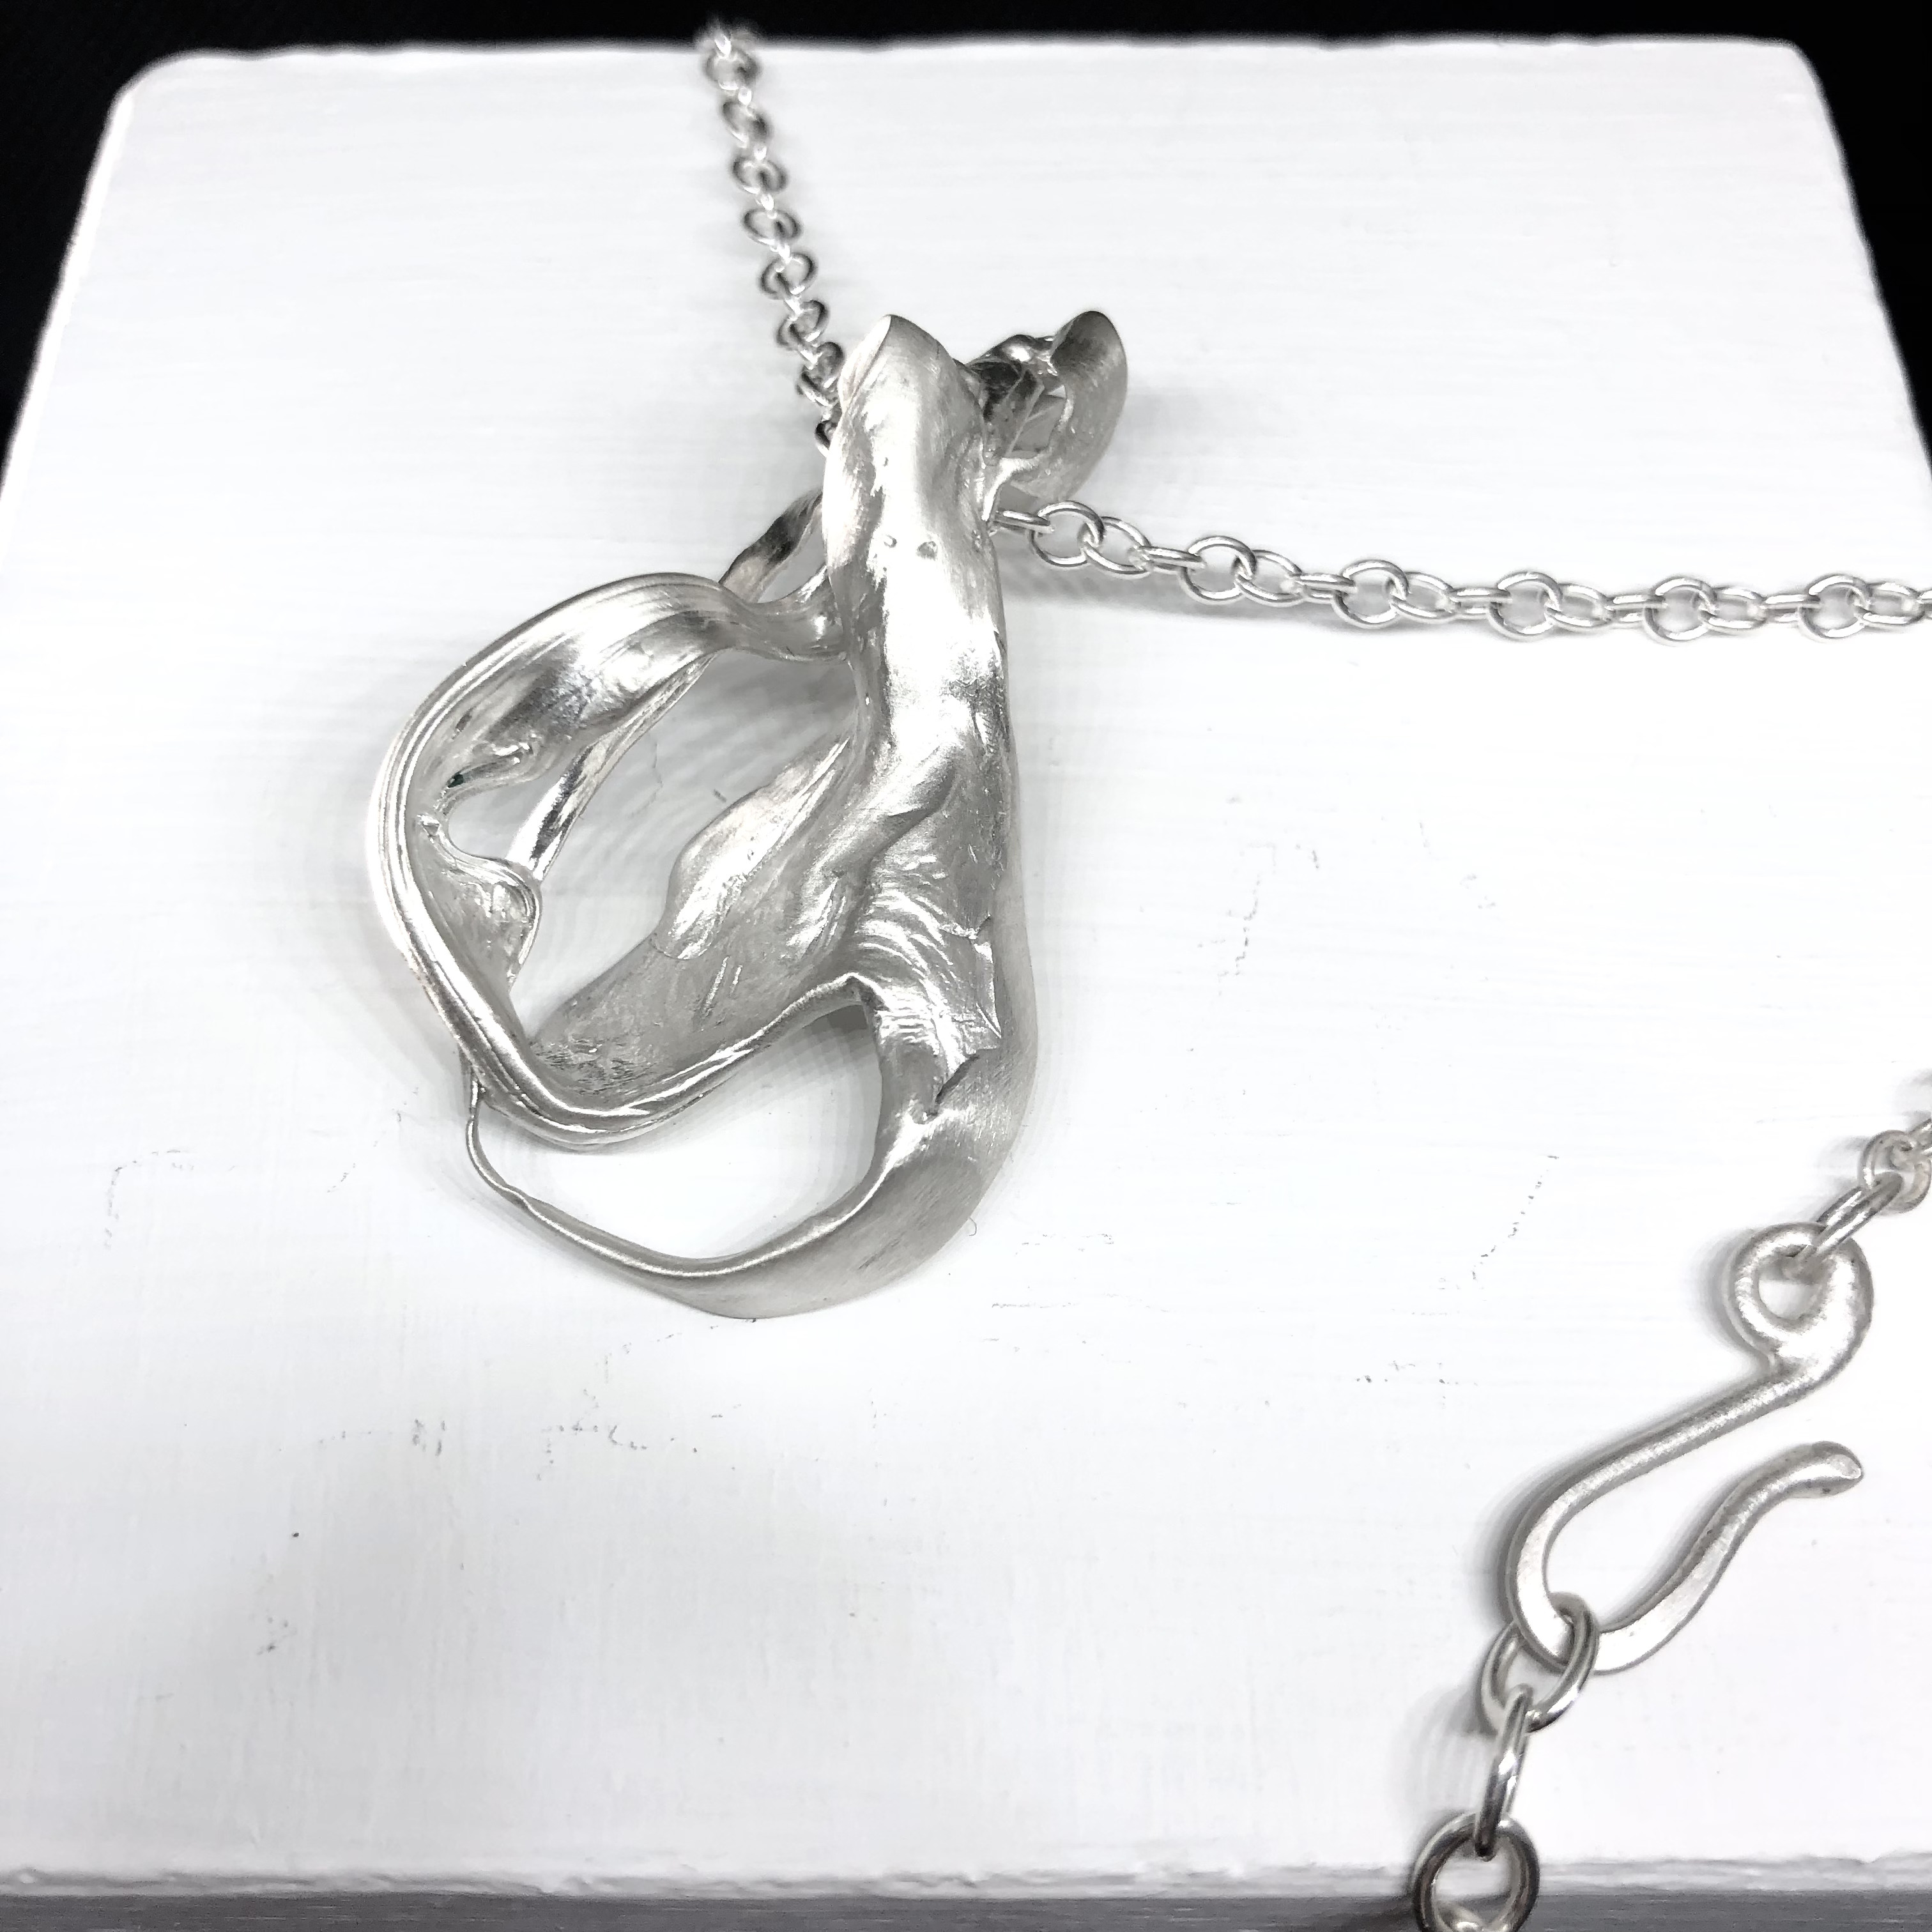 Charlotte E Padgham SKINS 100% recycled sterling silver pendant satin silver finish chain 2a